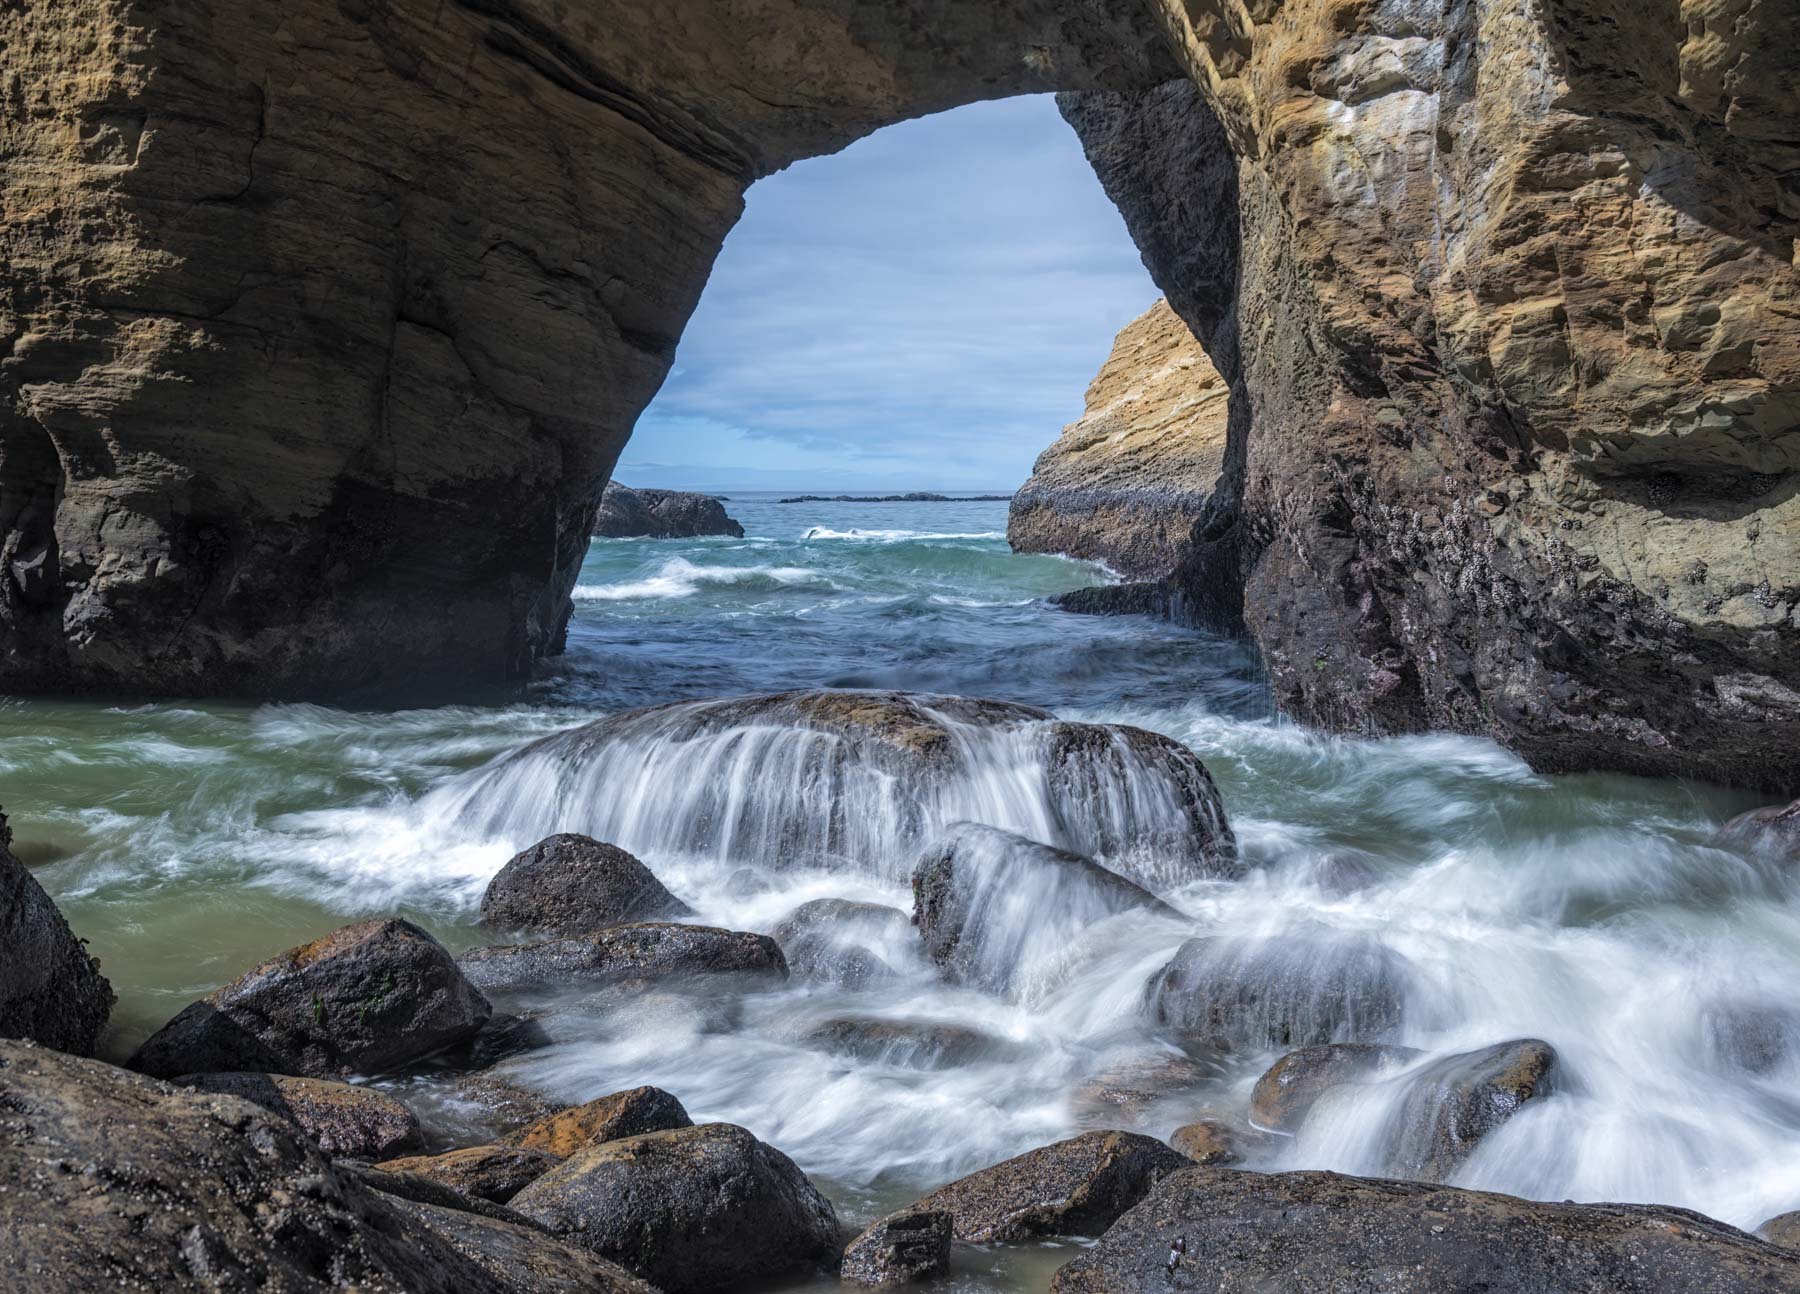 The Interior of the Devil's Punchbowl on the Oregon Coast